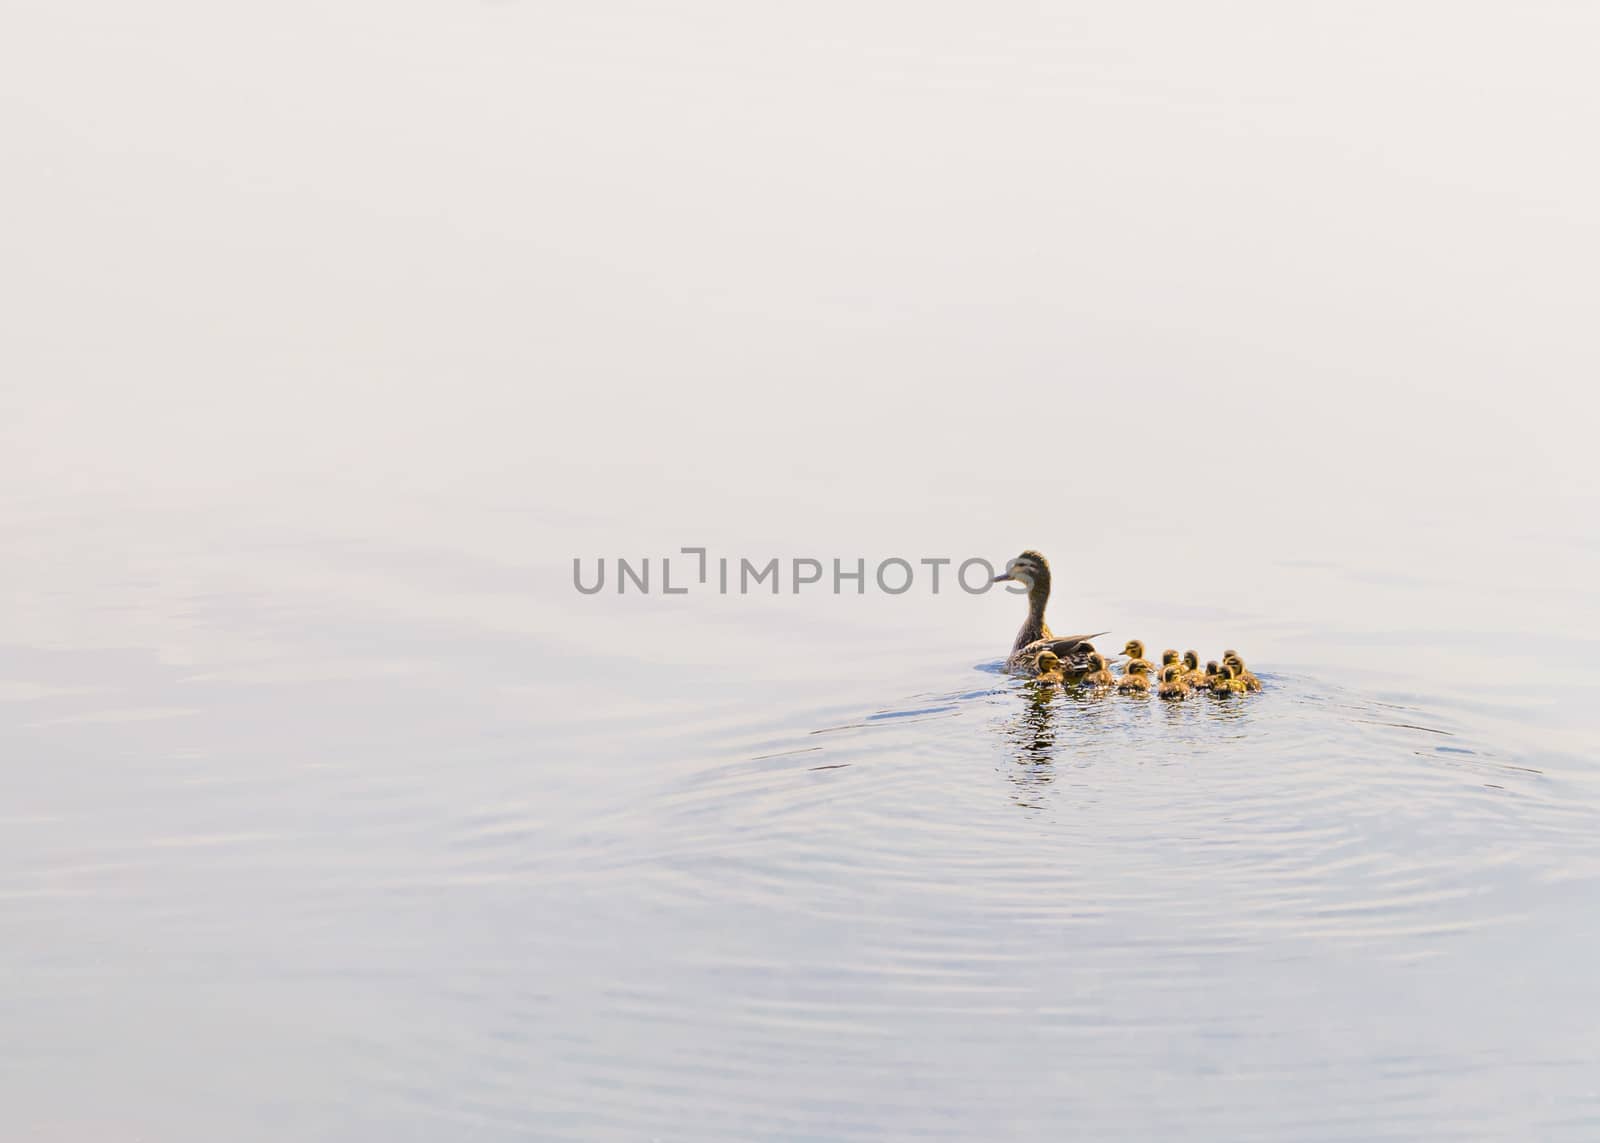 An adult female duck is swimming on the Dnieper river followed by her duckling family